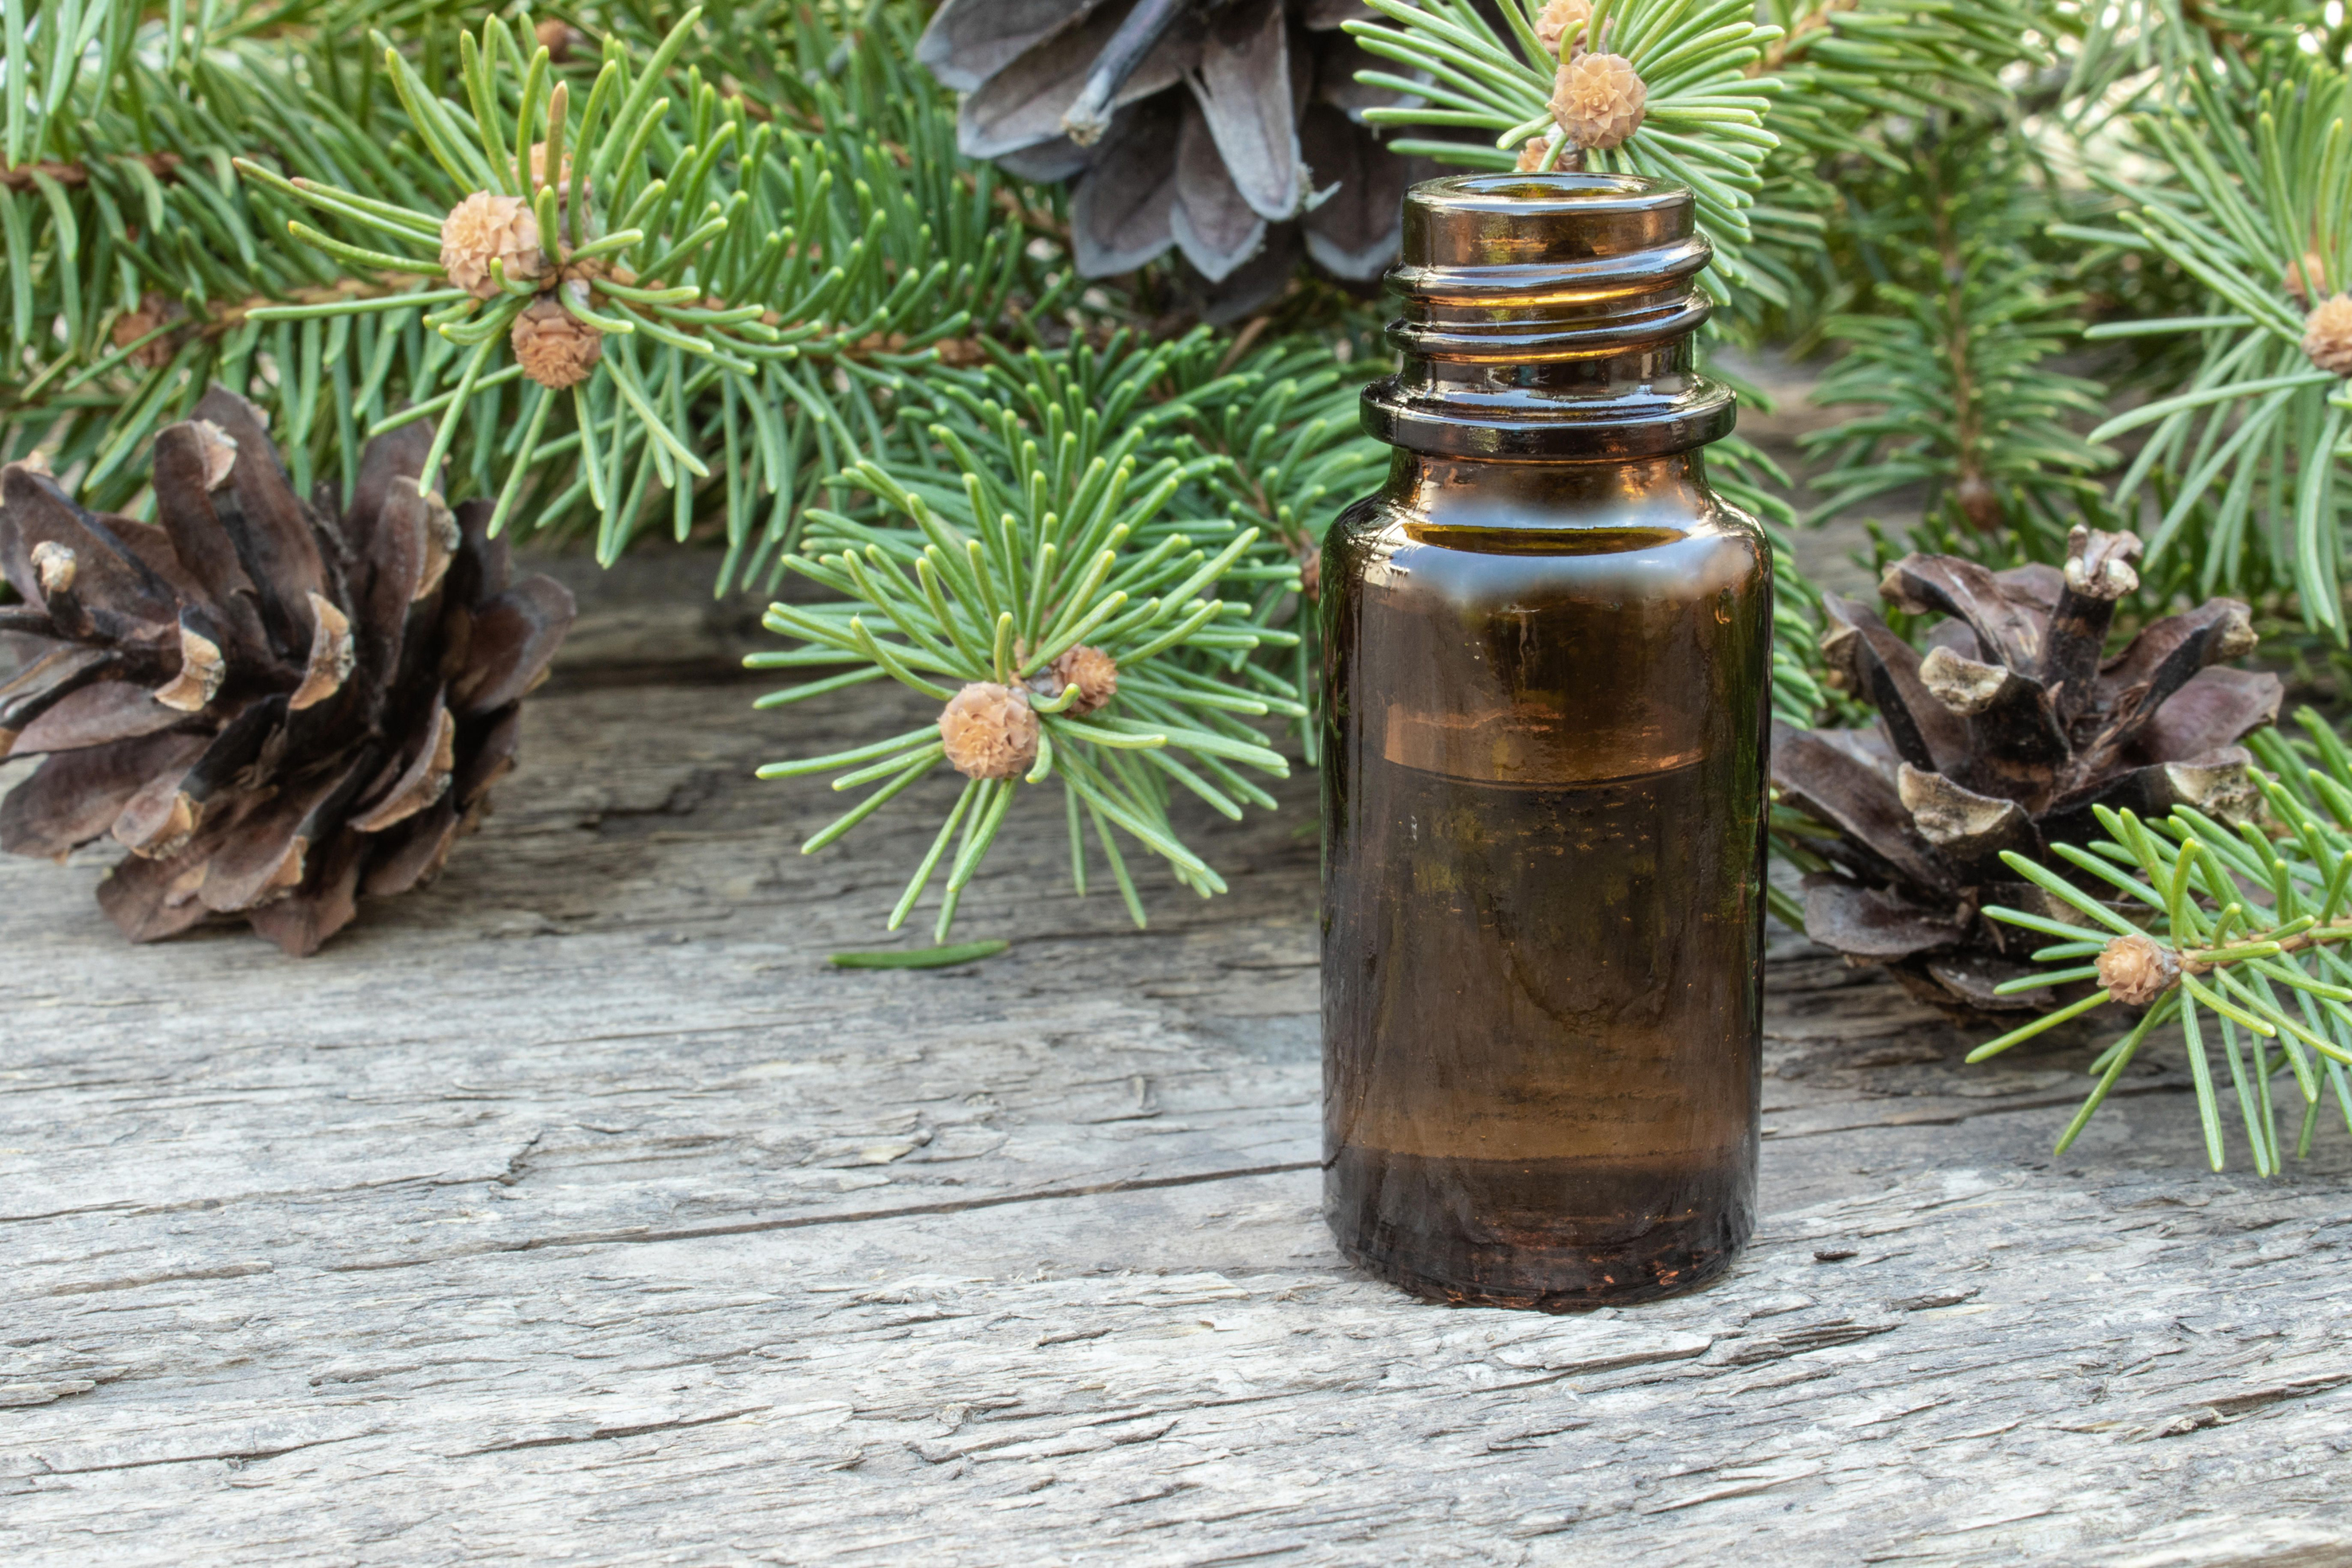 Pine essential oil with pine cones